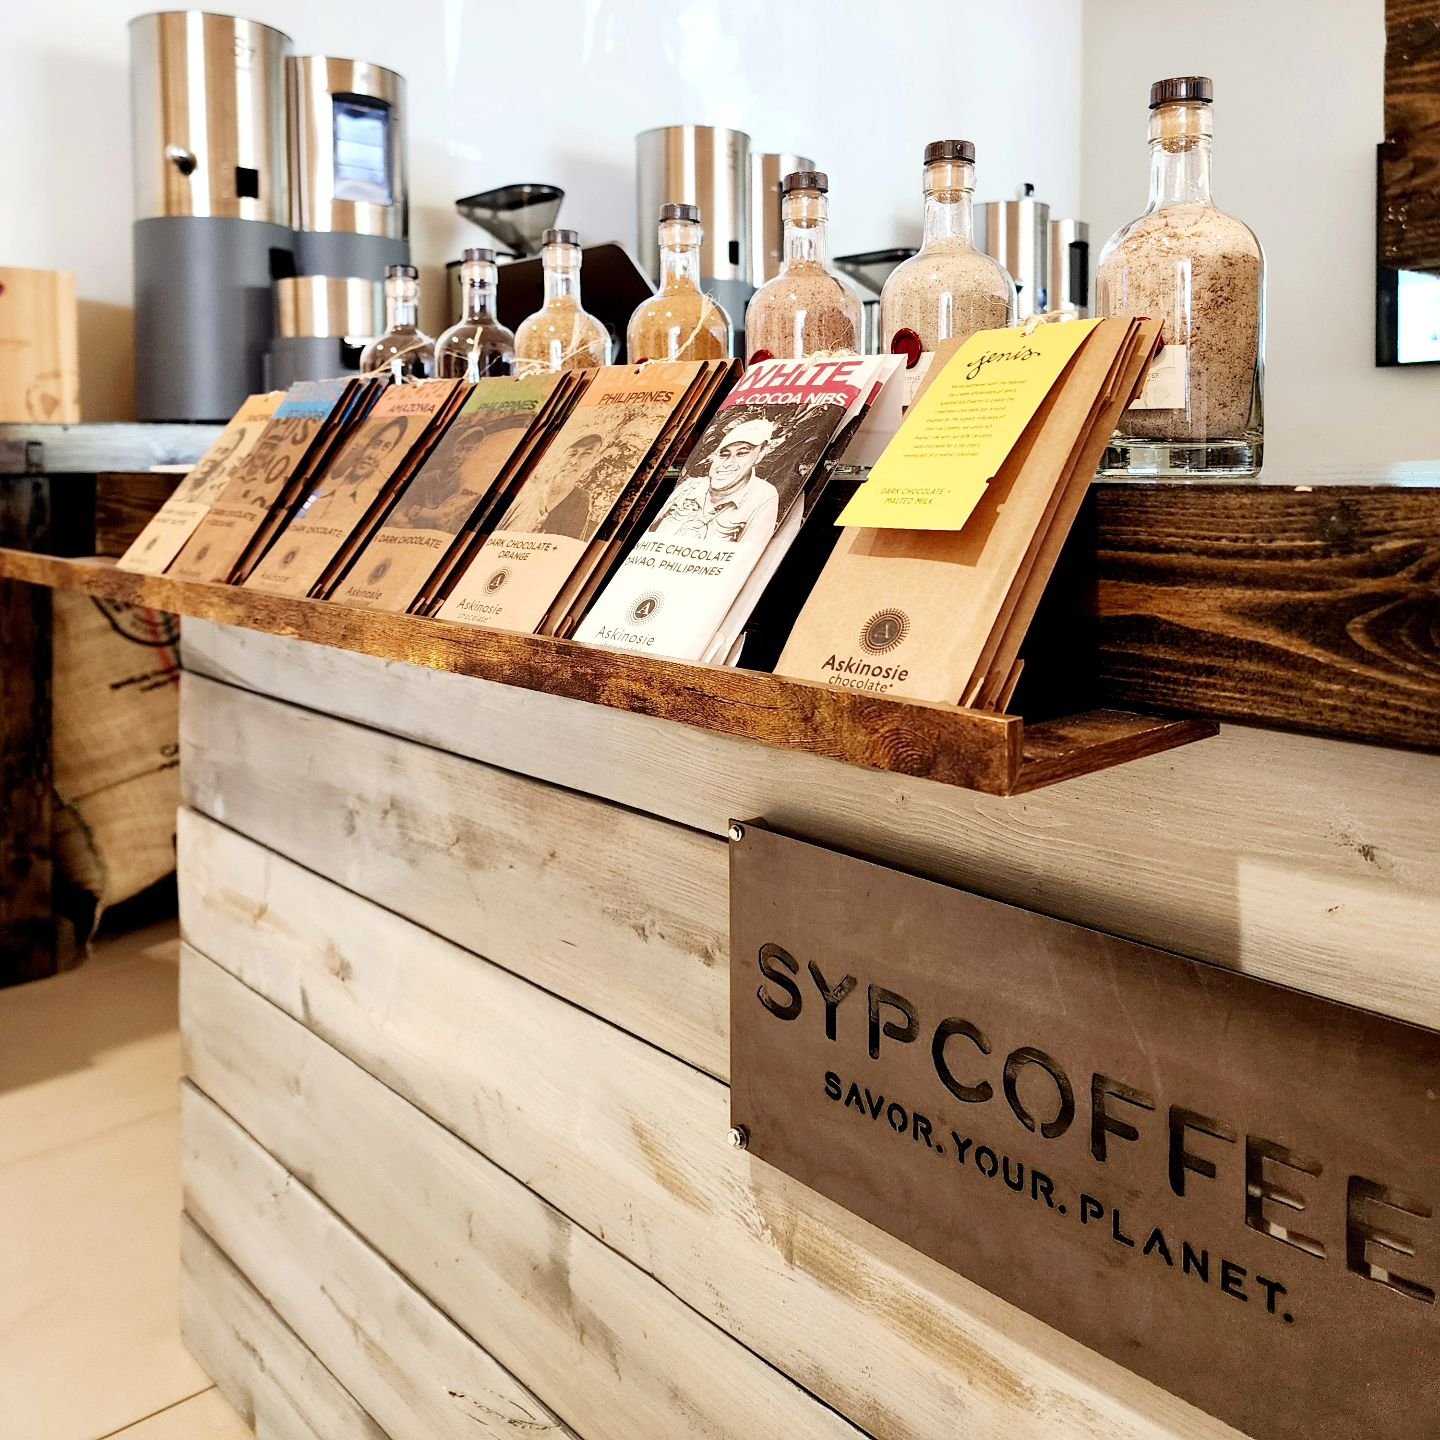 SYPCOFFEE always means your order is roasted on demand, just for you. It also means single-origin selections that are delicious all on their own, including our newest Washed, Rainforest Alliance selection from Colombia.
.
Medium roasted, this cup sho